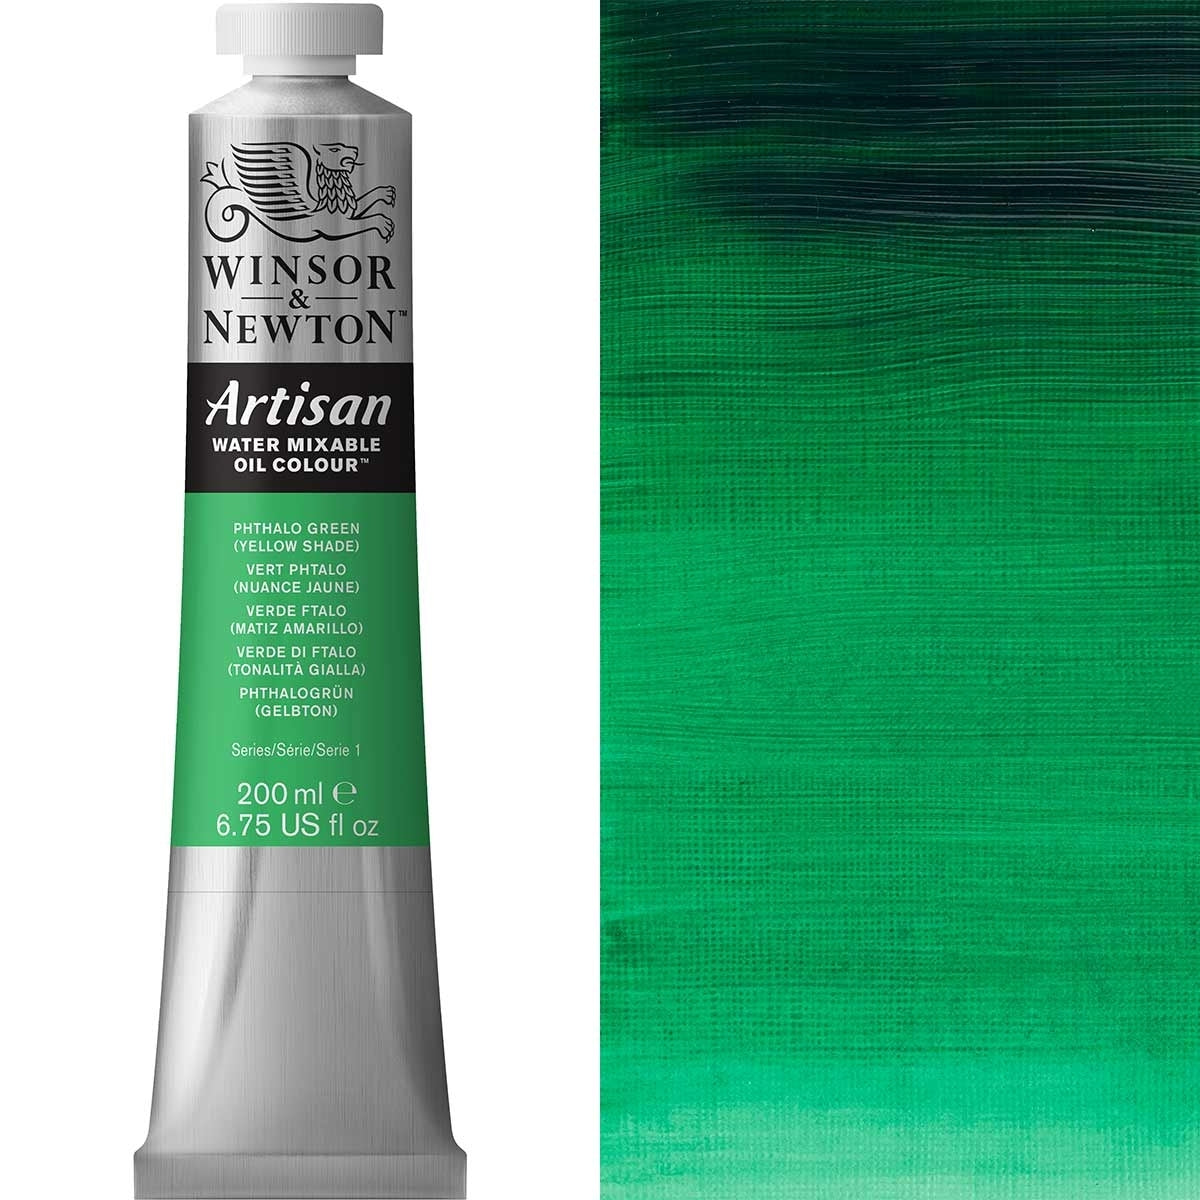 Winsor and Newton - Artisan Oil Colour Watermixable - 200ml - Phthalo Green Yellow Shade